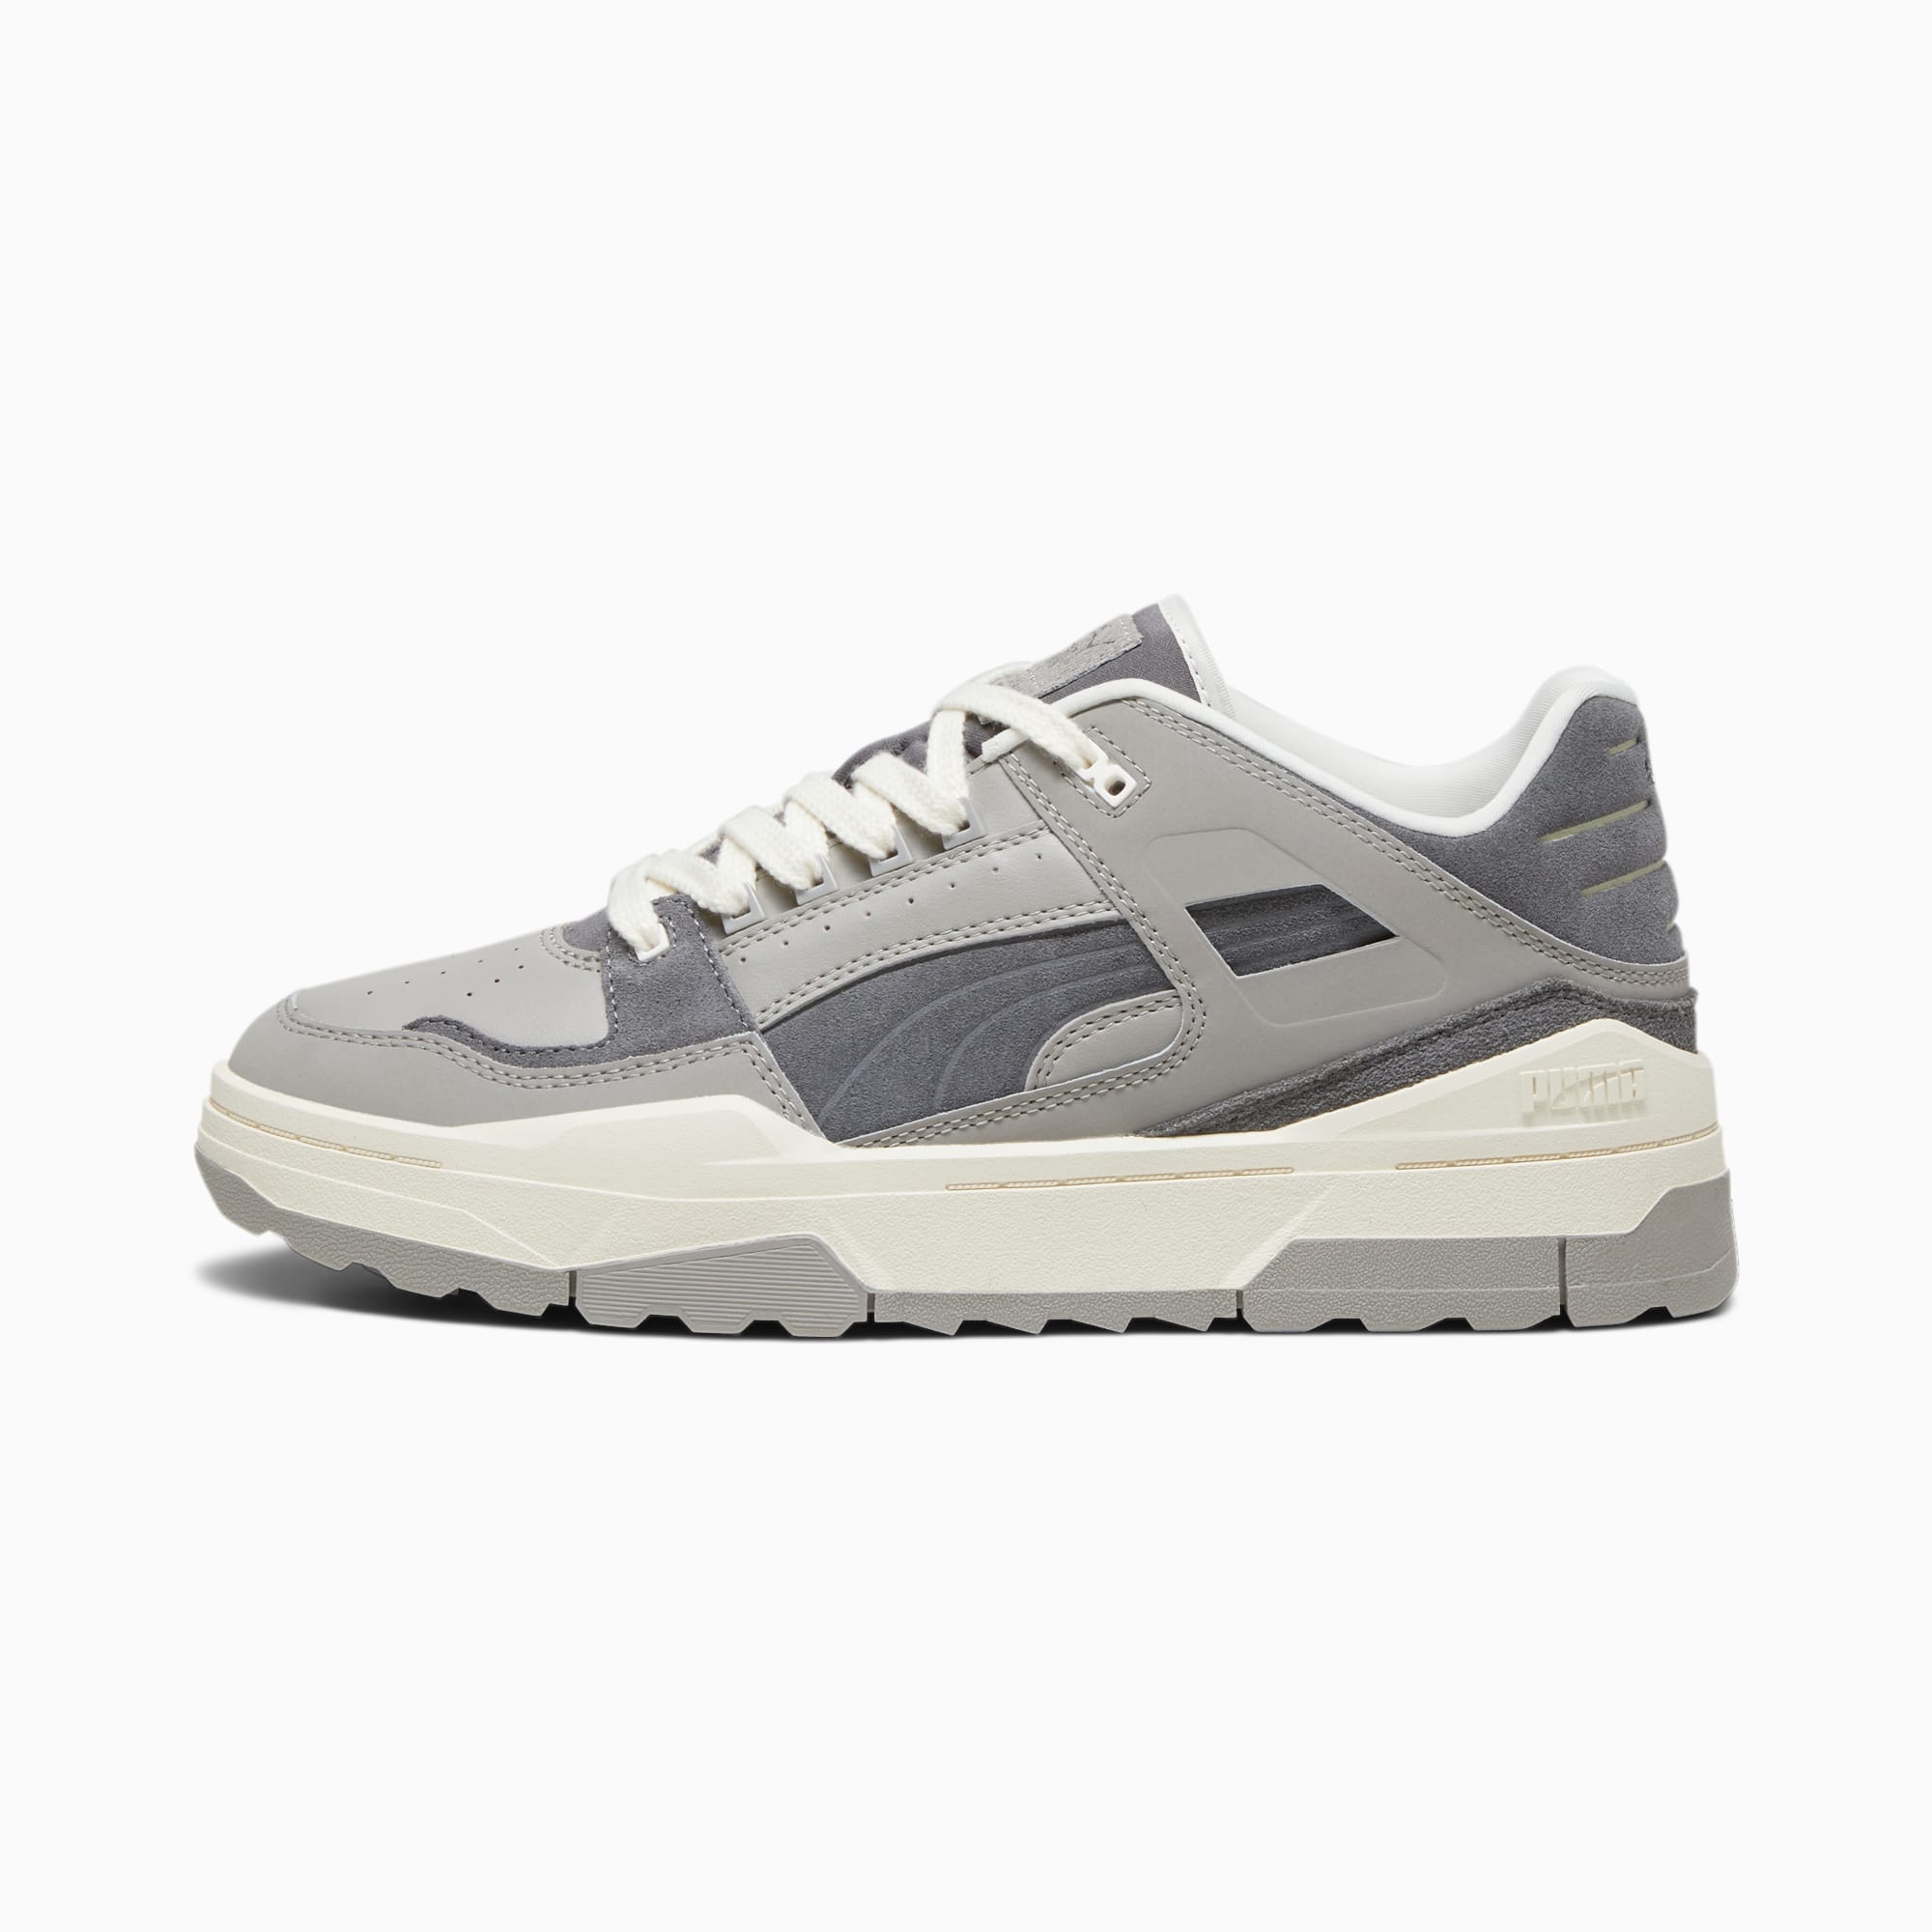 PUMA Chaussure Sneakers Slipstream Xtreme, Gris